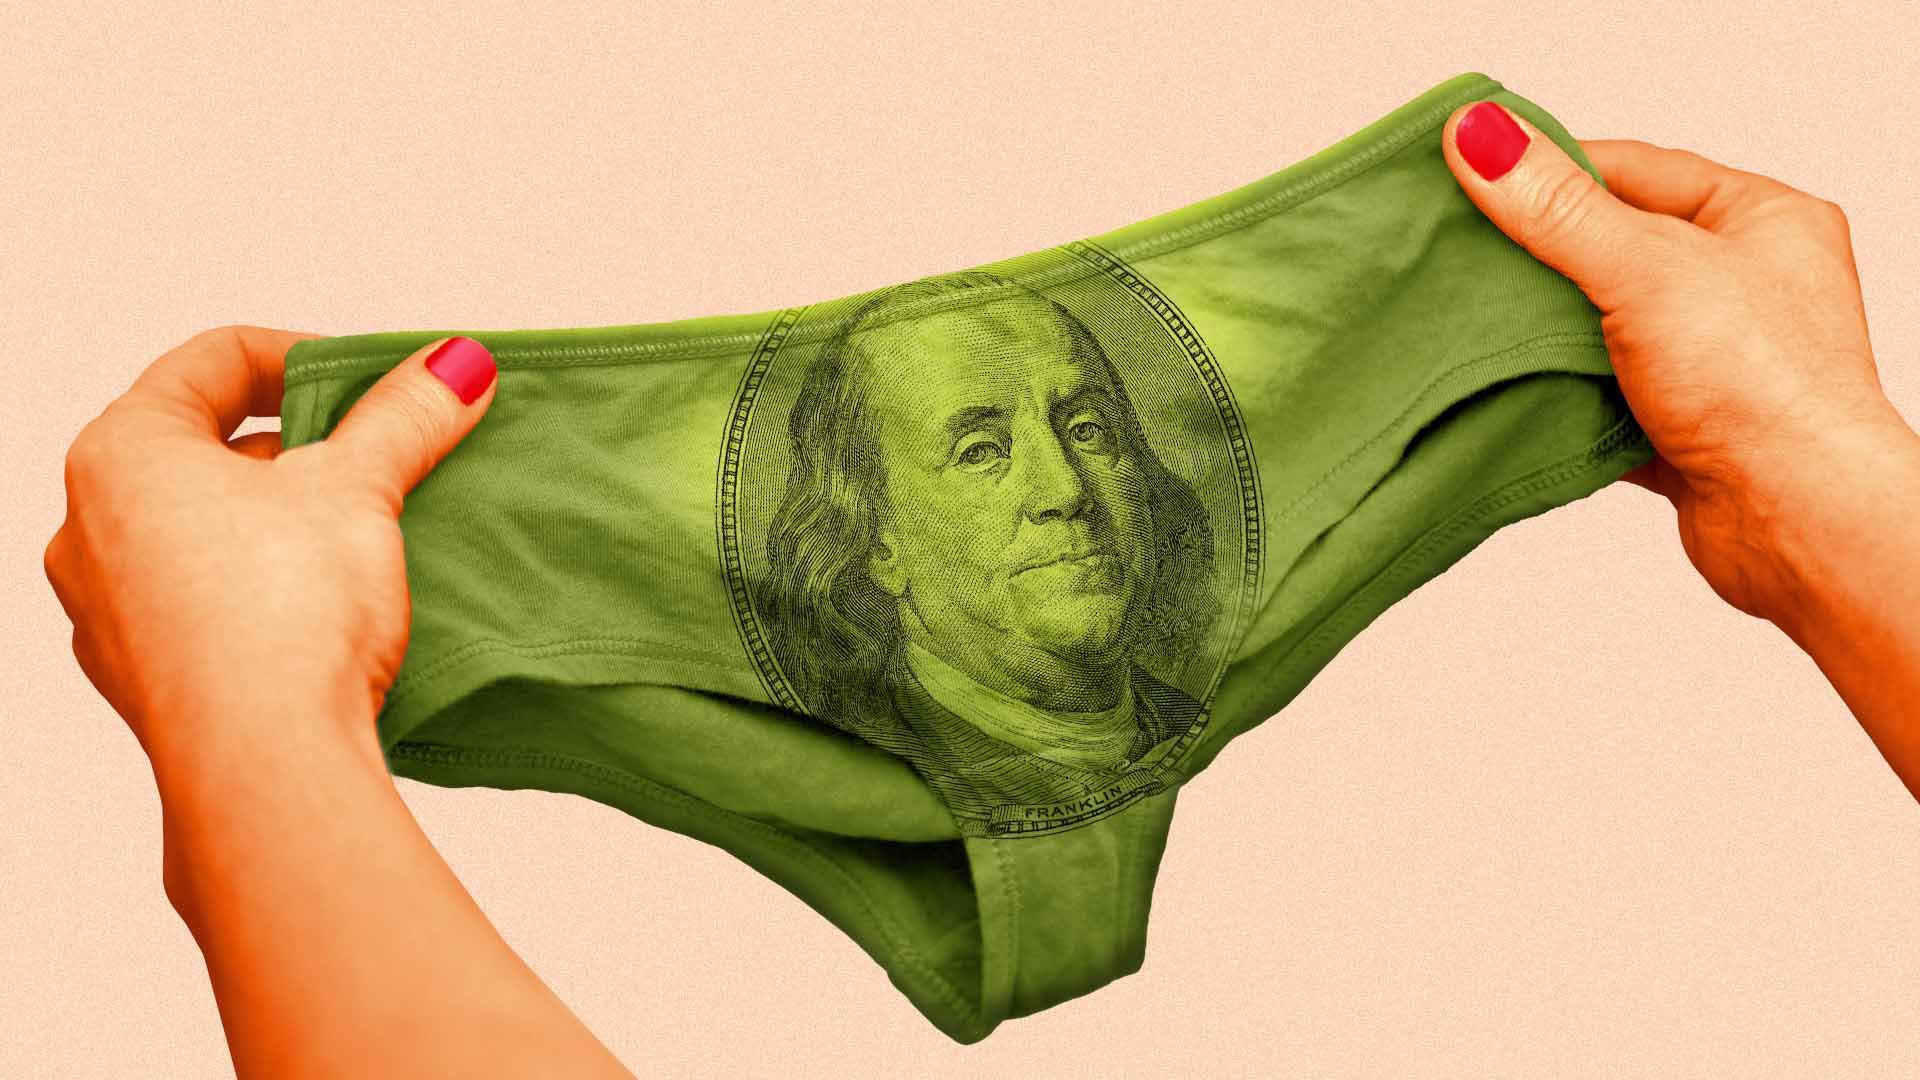 Report: Women's underwear taxed more than men's in the US